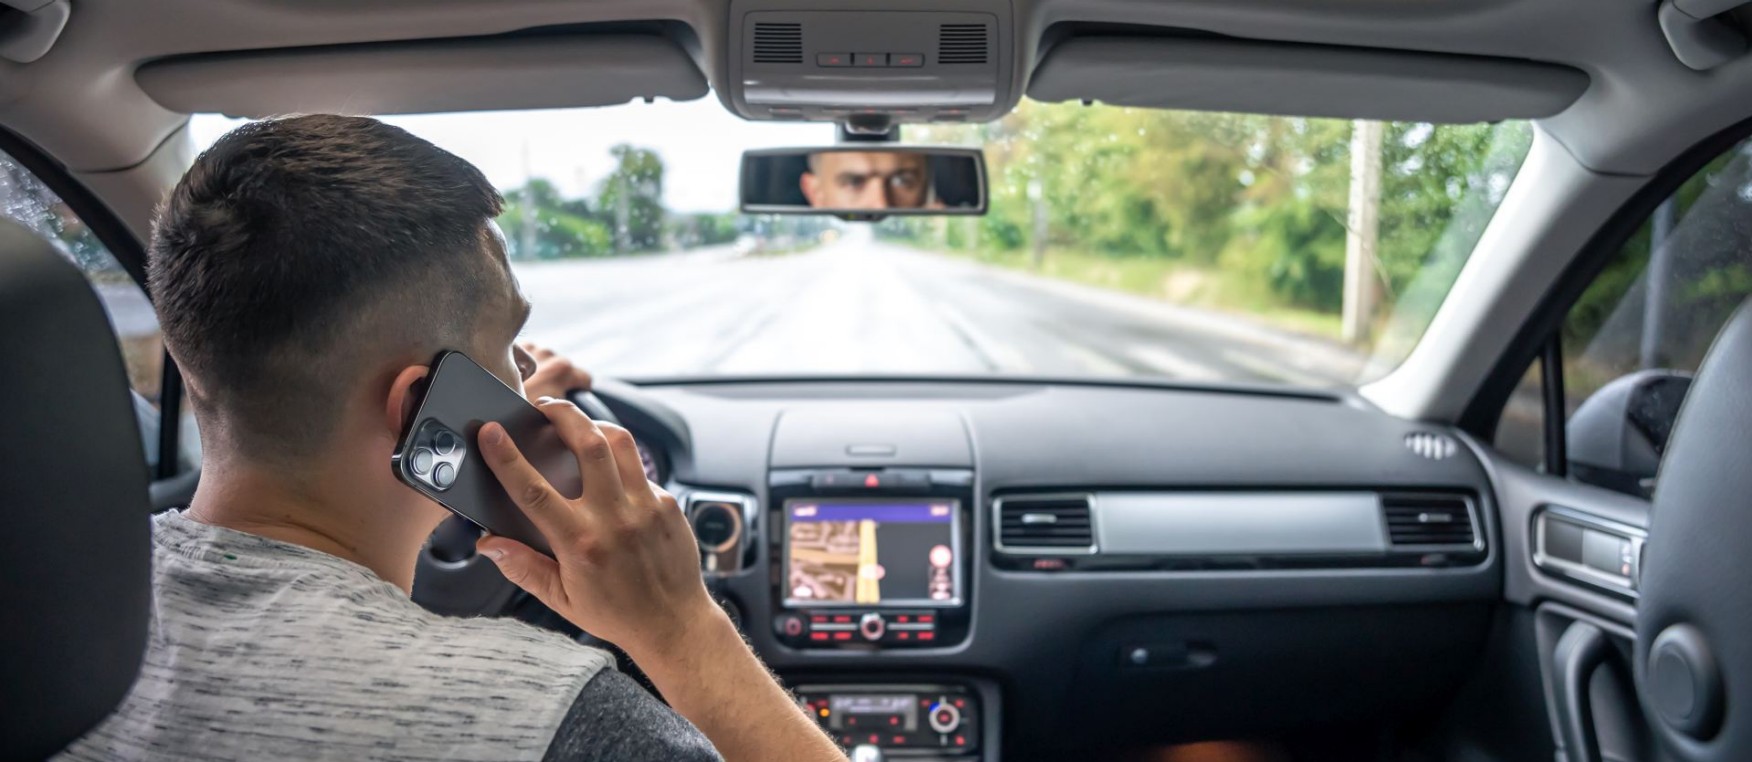 Businessman talking on cell phone while driving.